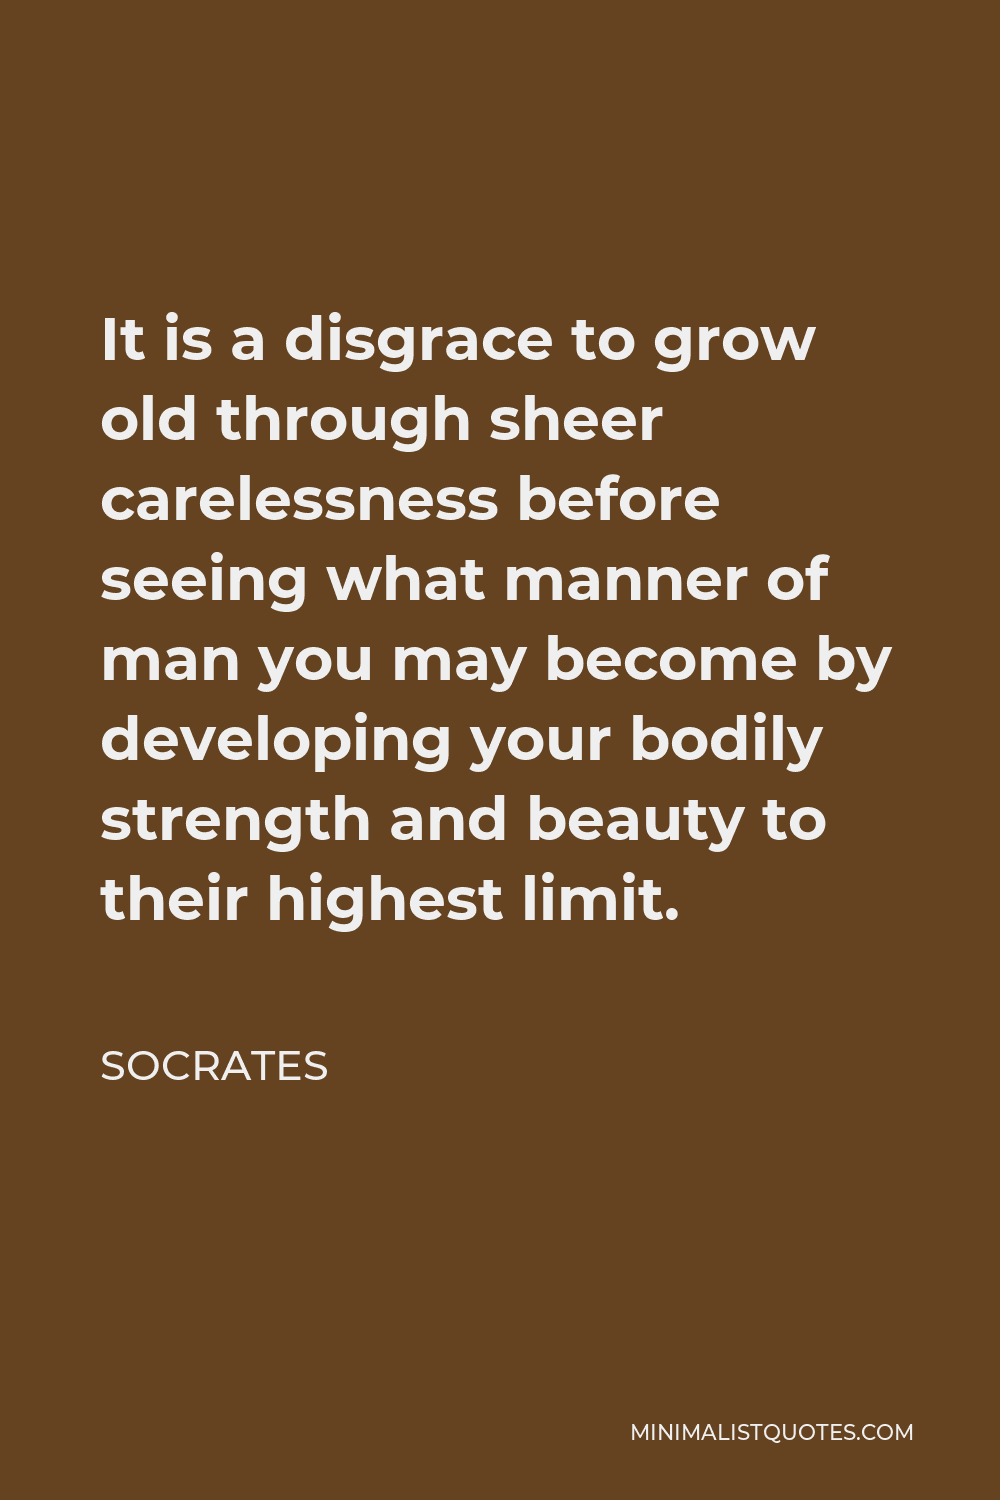 Socrates Quote - It is a disgrace to grow old through sheer carelessness before seeing what manner of man you may become by developing your bodily strength and beauty to their highest limit.